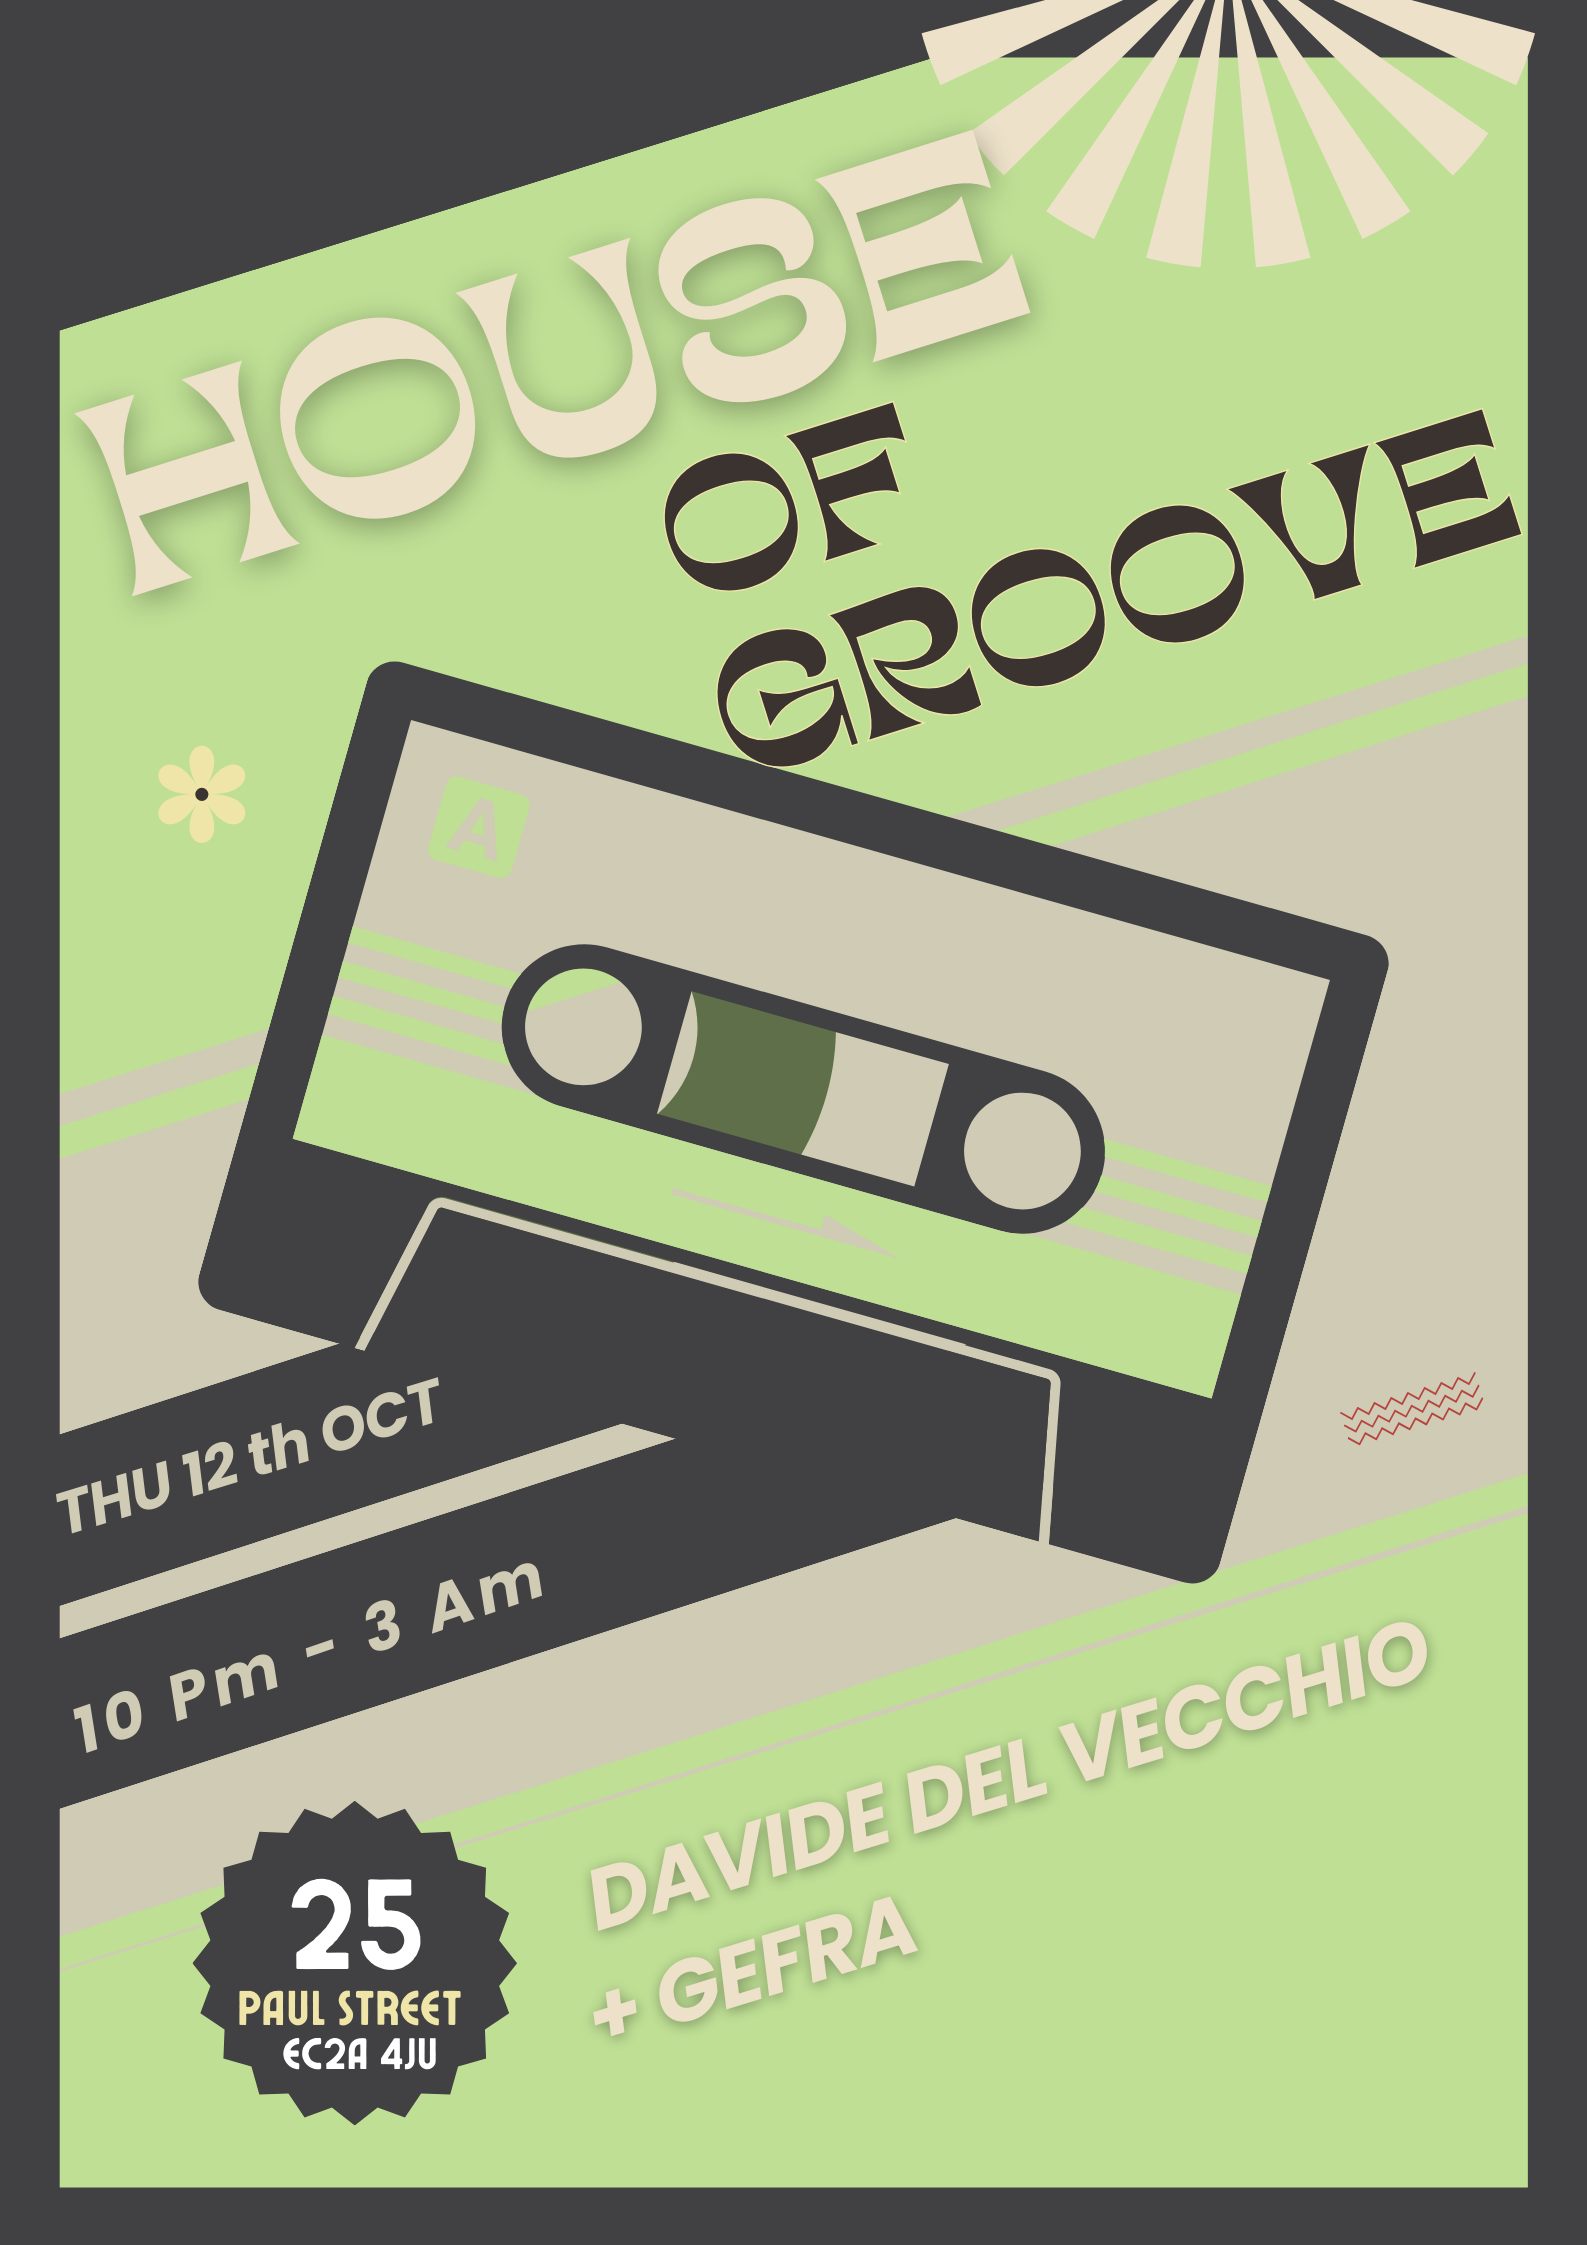 HOUSE OF GROOVE - Página frontal